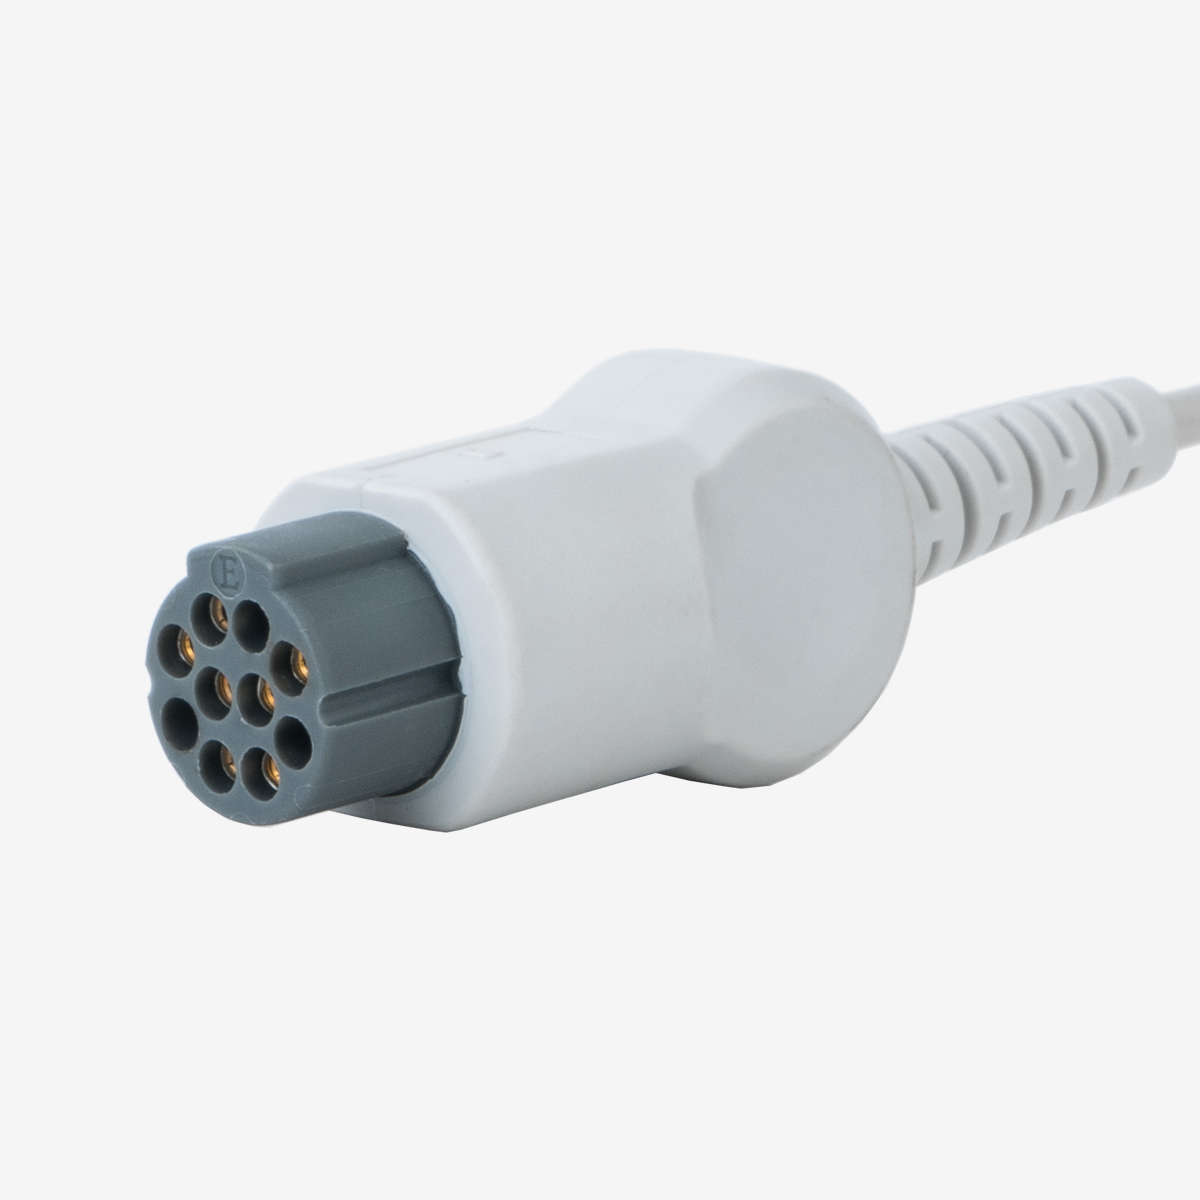 White SpO2 connector with gray tip and female front, shown at an angle